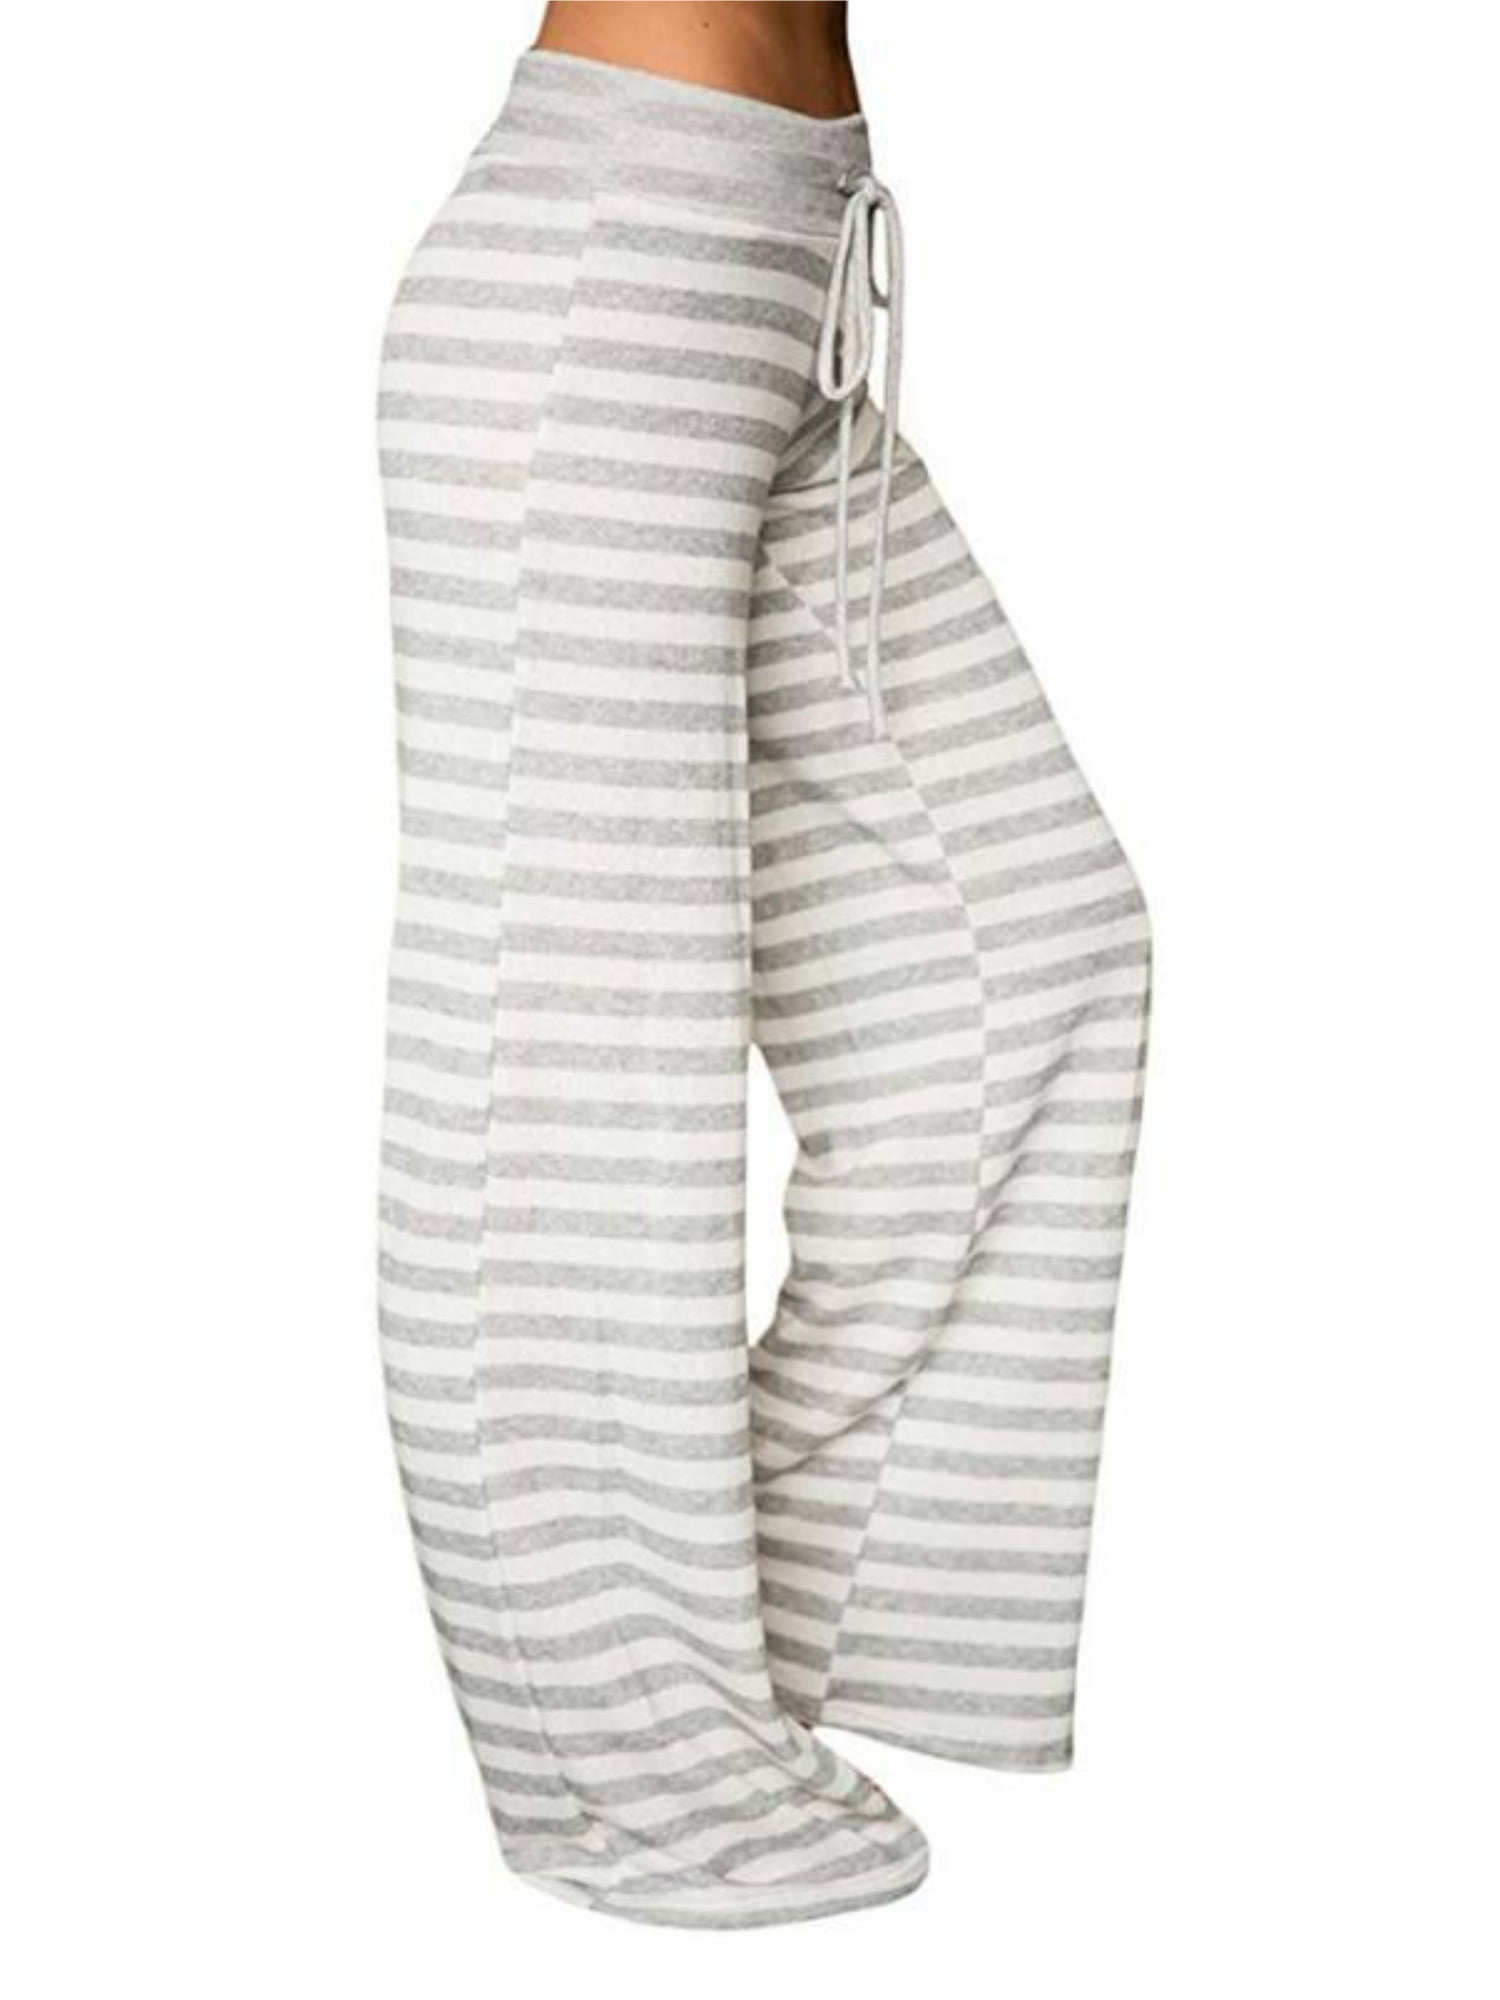 Mstyle Womens Summer Solid Loose Casual Stripe Print Wide Leg Palazzo Lounge Pants